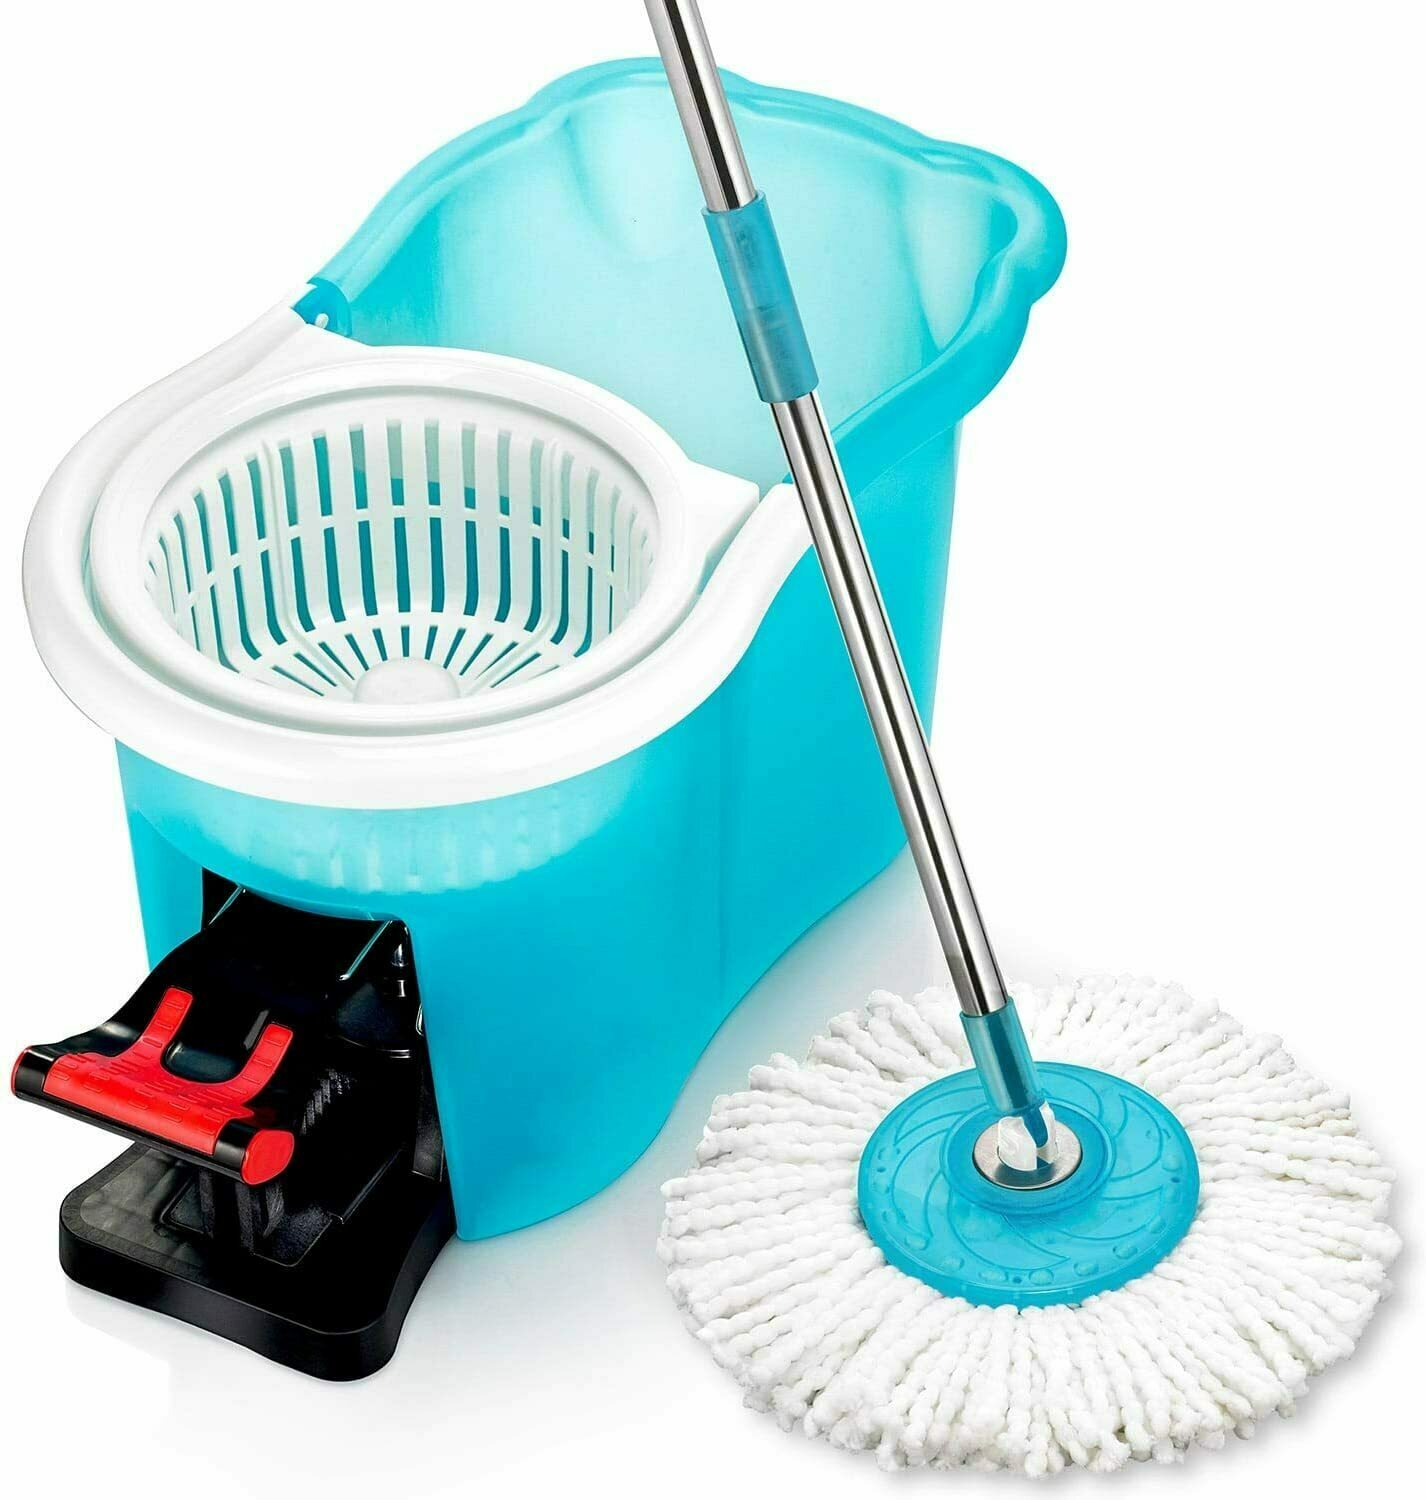 Hurricane Spin Mop Home Cleaning System by Bulbhead